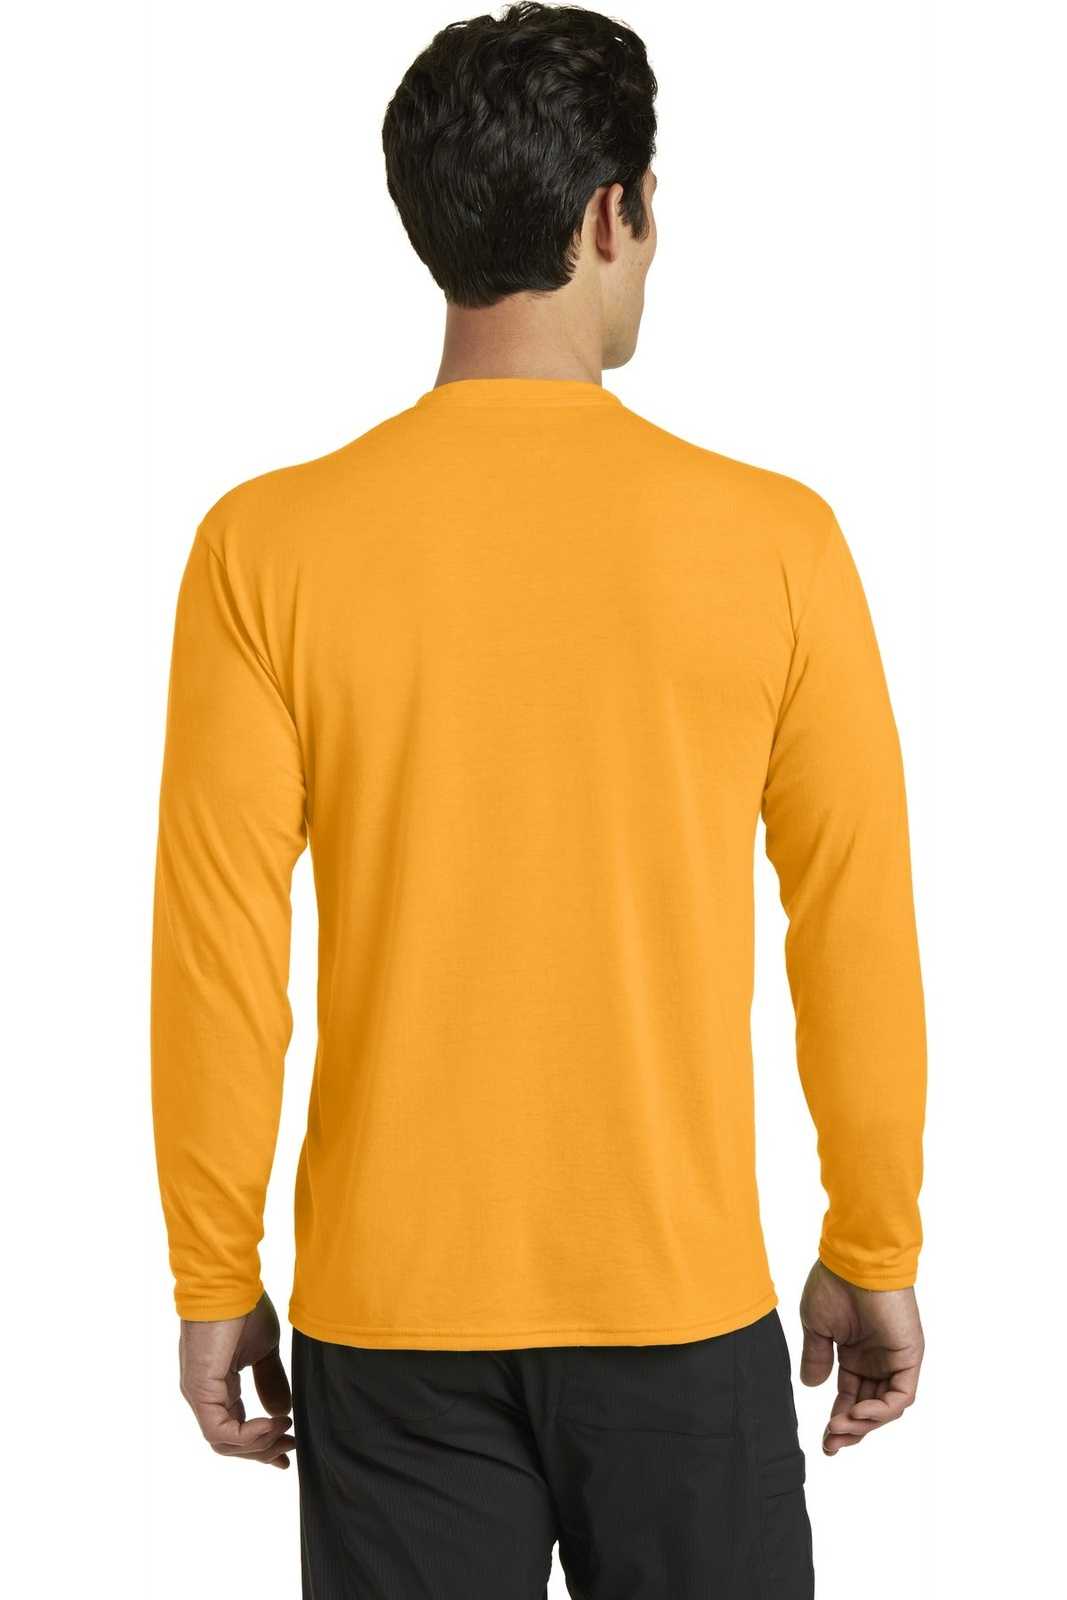 Port & Company PC381LS Long Sleeve Performance Blend Tee - Gold - HIT a Double - 1